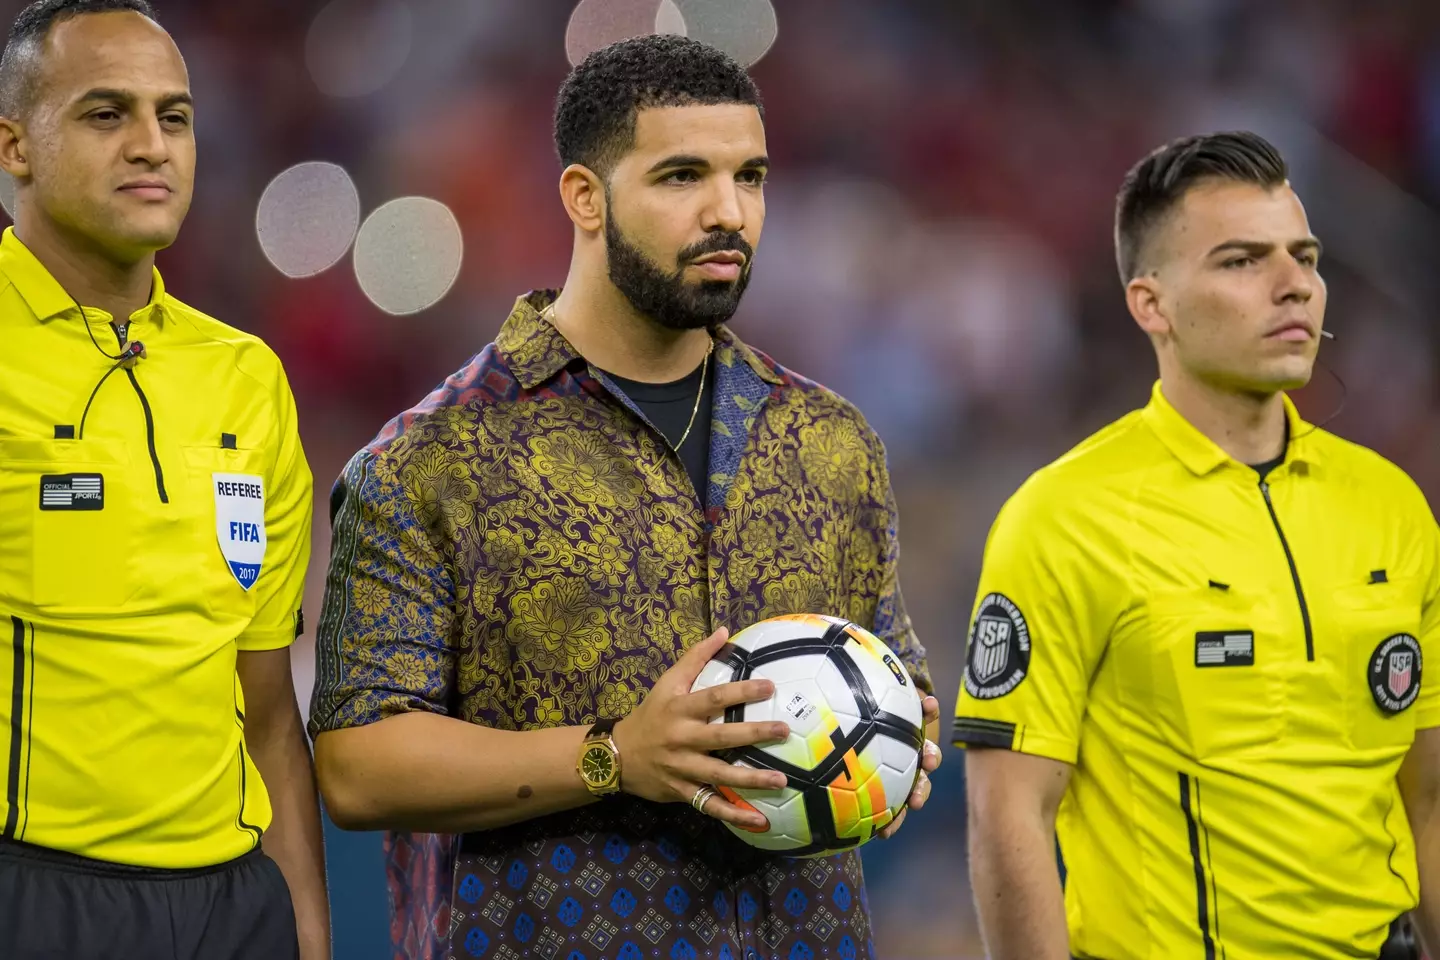 Drake also likes to bet on soccer.